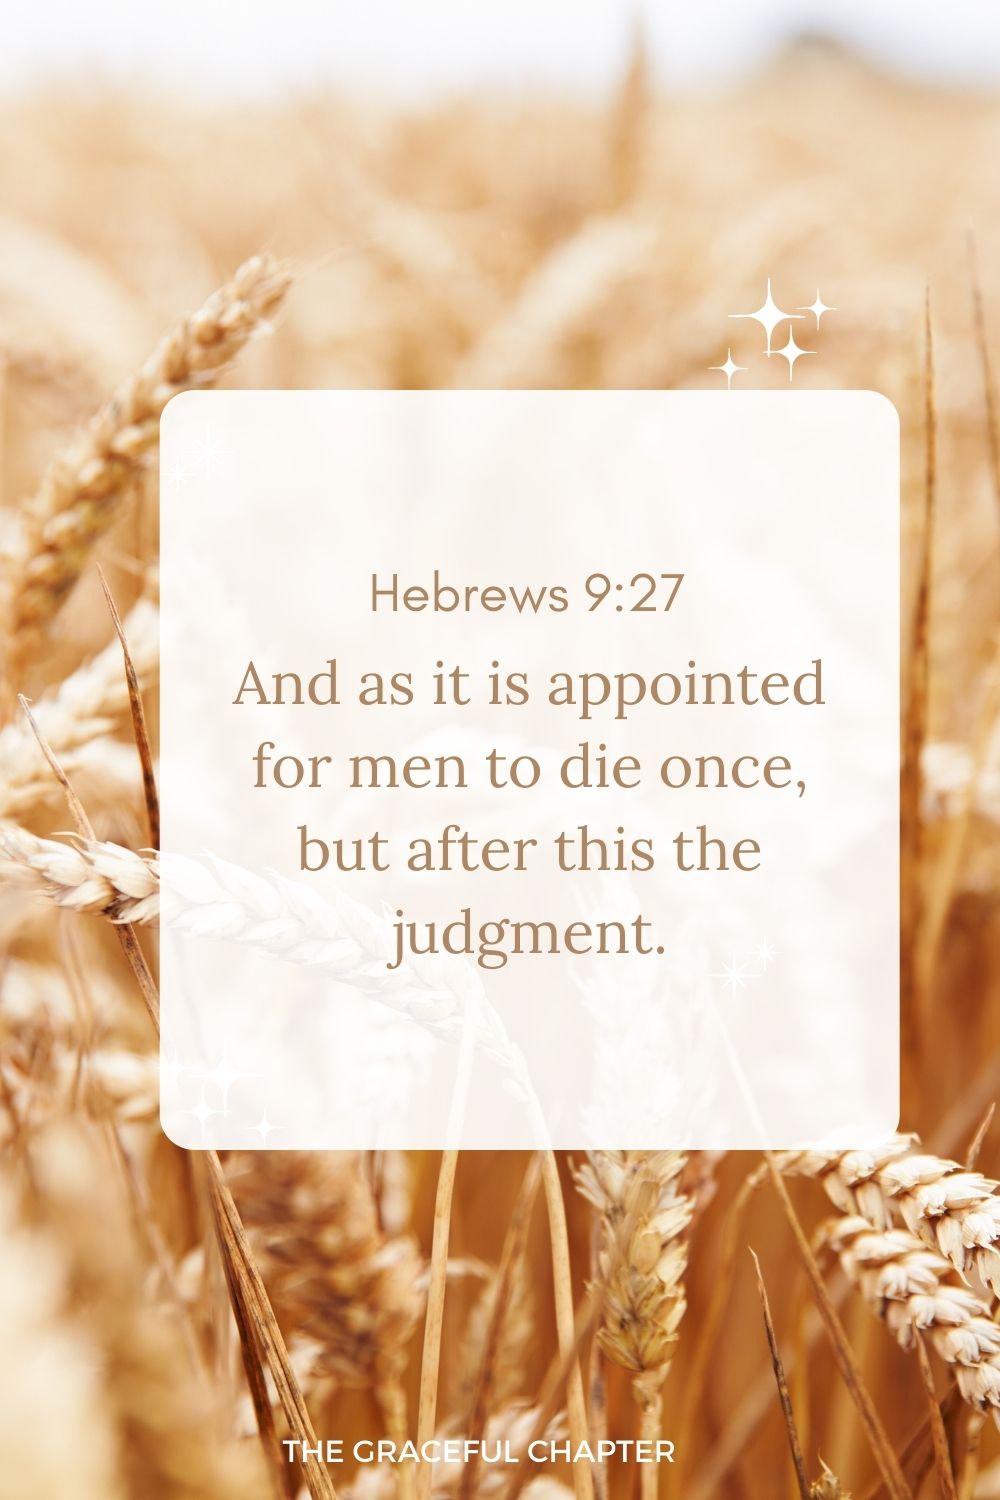 And as it is appointed for men to die once, but after this the judgment. Hebrews 9:27